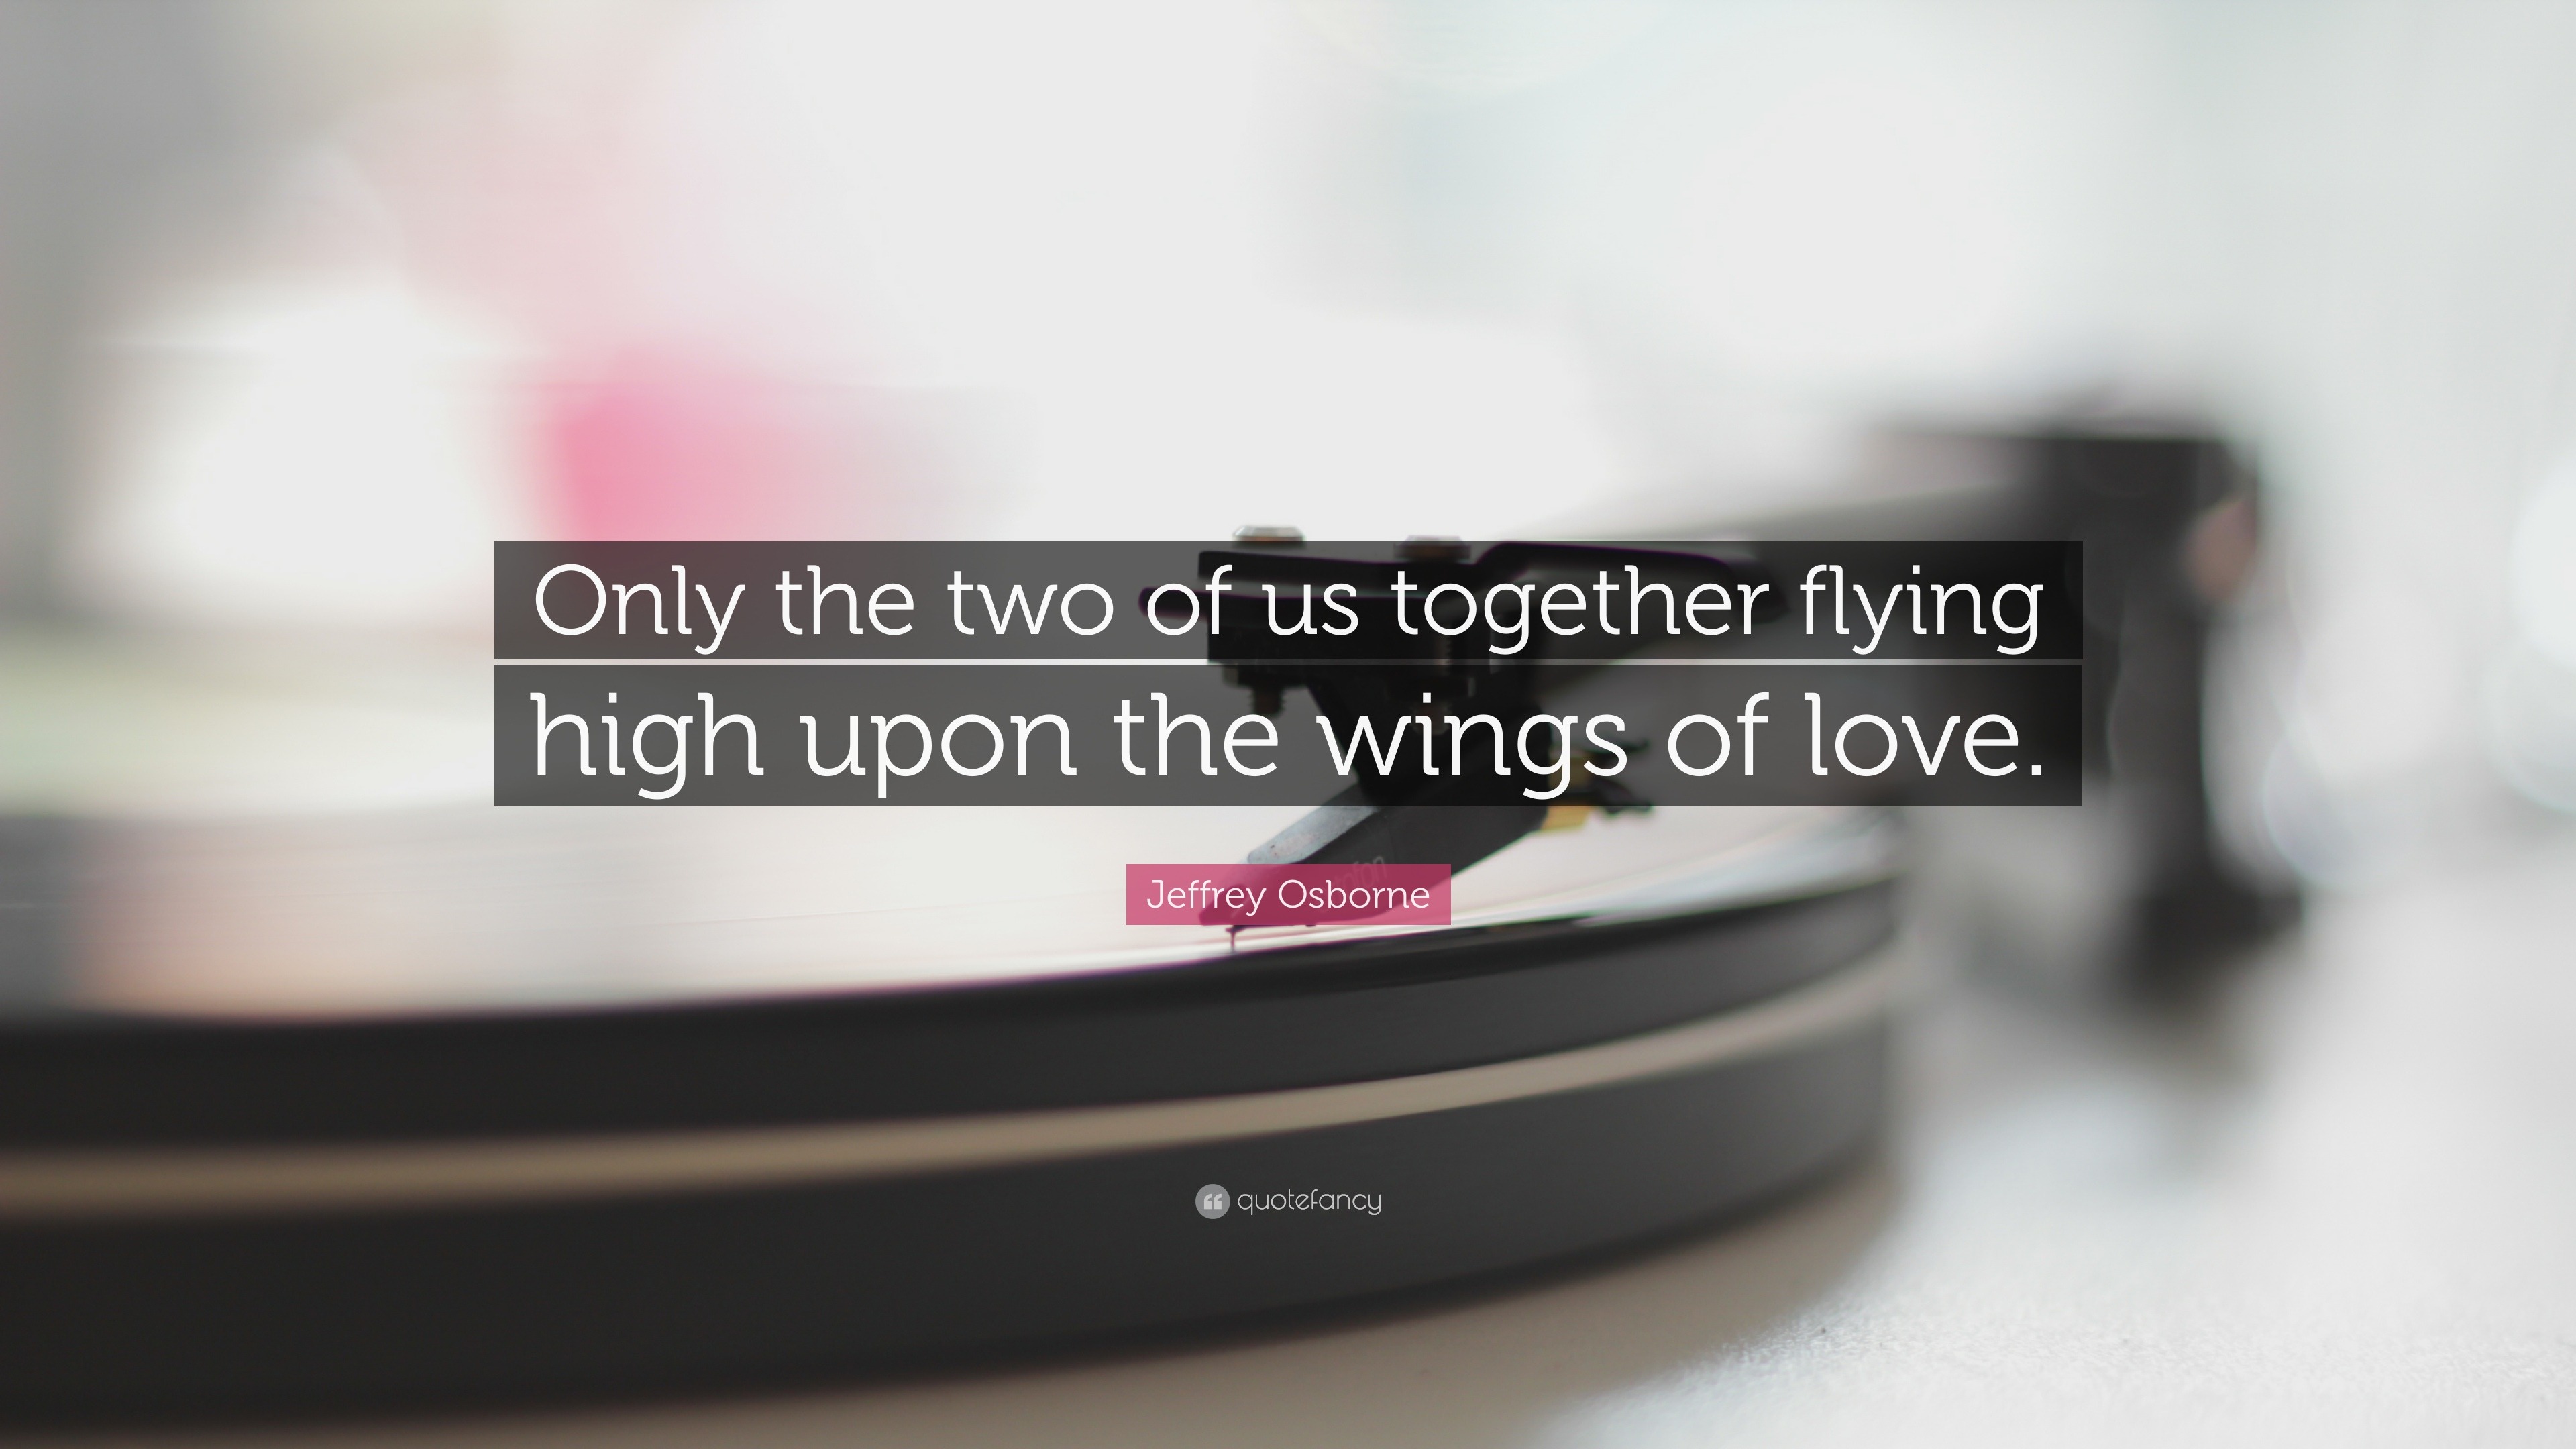 Jeffrey Osborne quote: Only the two of us together flying high upon the